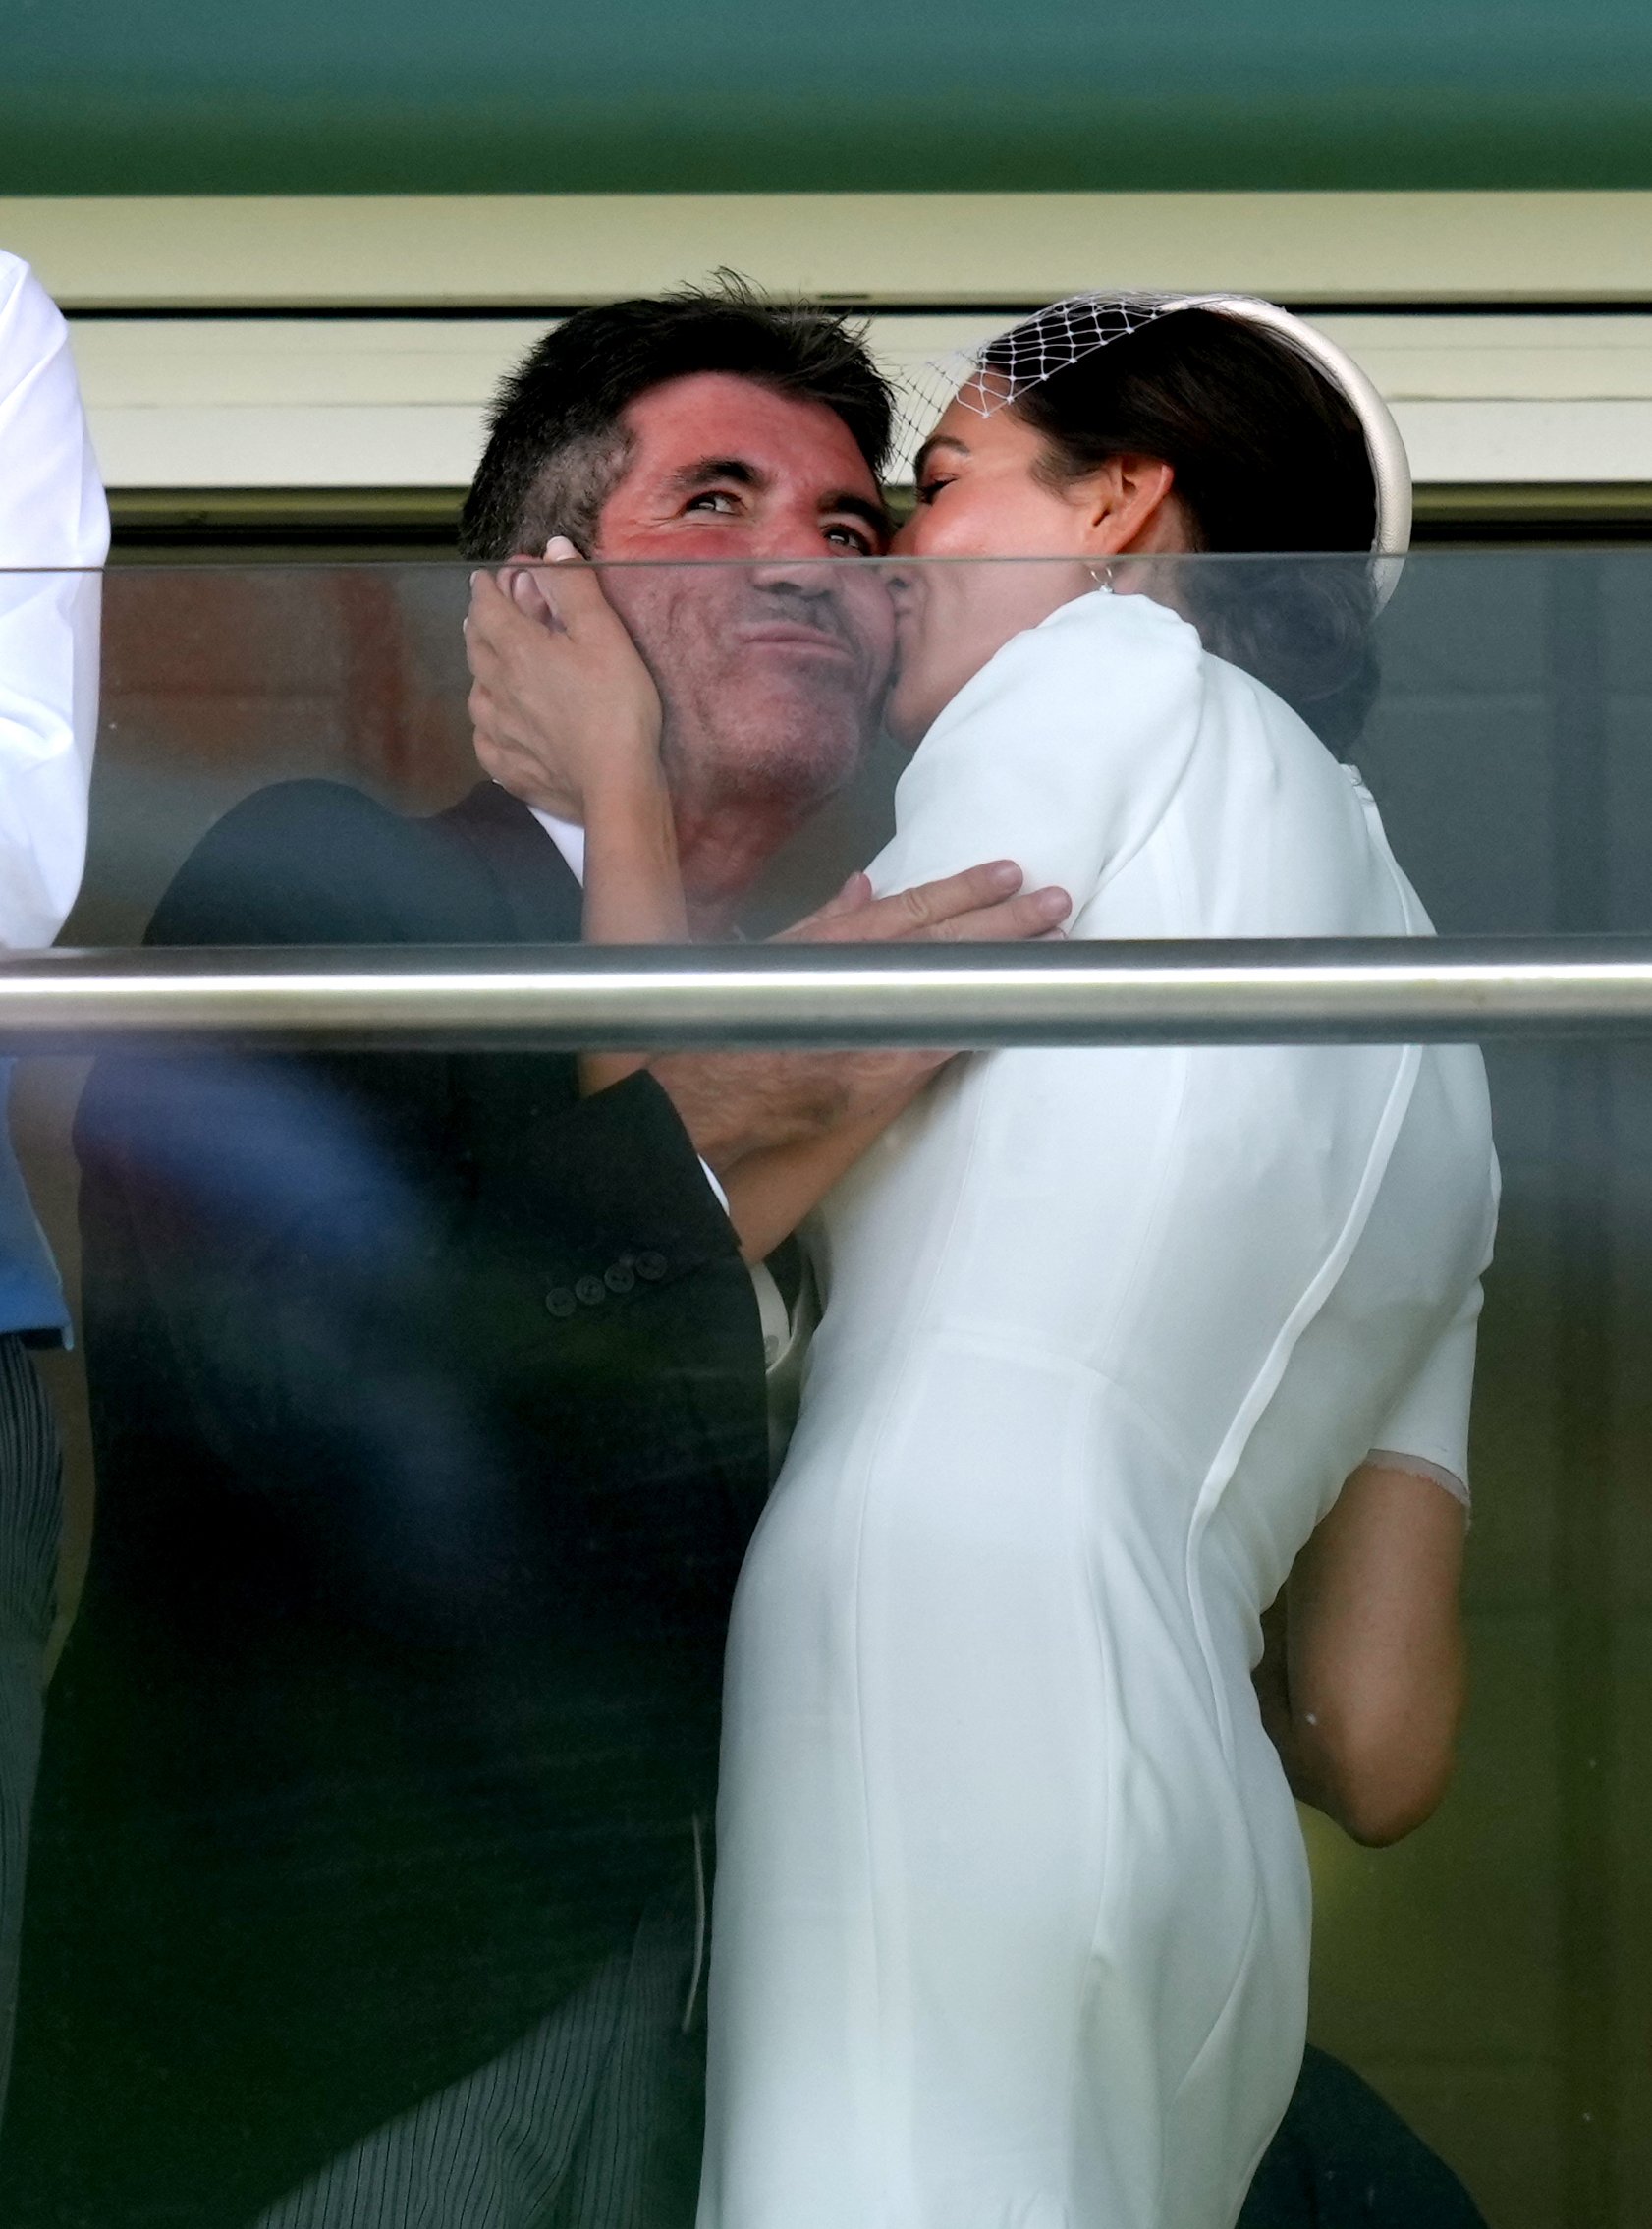 Simon Cowell and Lauren Silverman during day two of the Cazoo Derby Festival at Epsom Racecourse on June 5, 2021 in Epsom, England. | Source: Getty Images